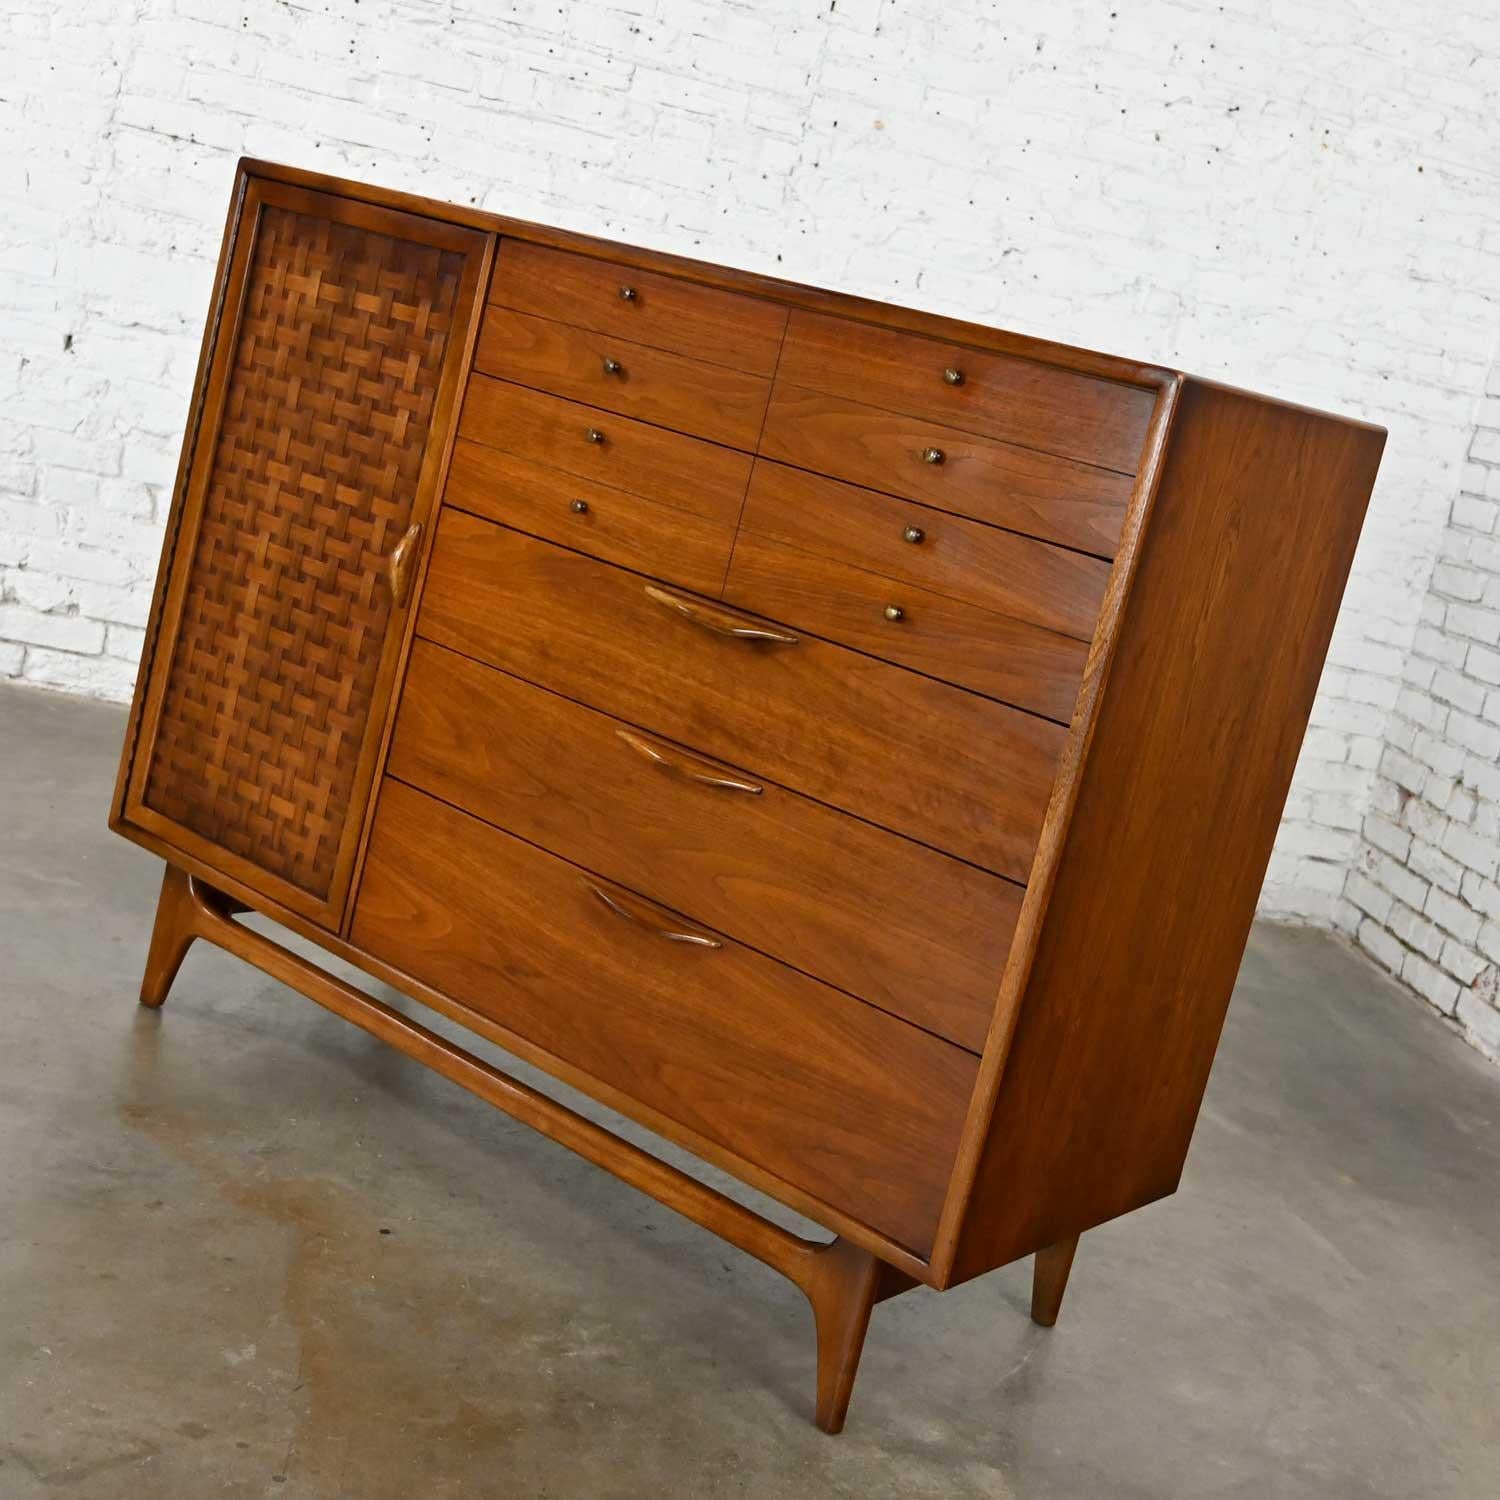 Wonderful Mid-Century Modern Lane Furniture console or dresser or chest of drawers designed by Warren Church for Lane’s Perception line collection. Comprised of walnut with brass and wood sculptured pulls. This piece is in fabulous condition keeping